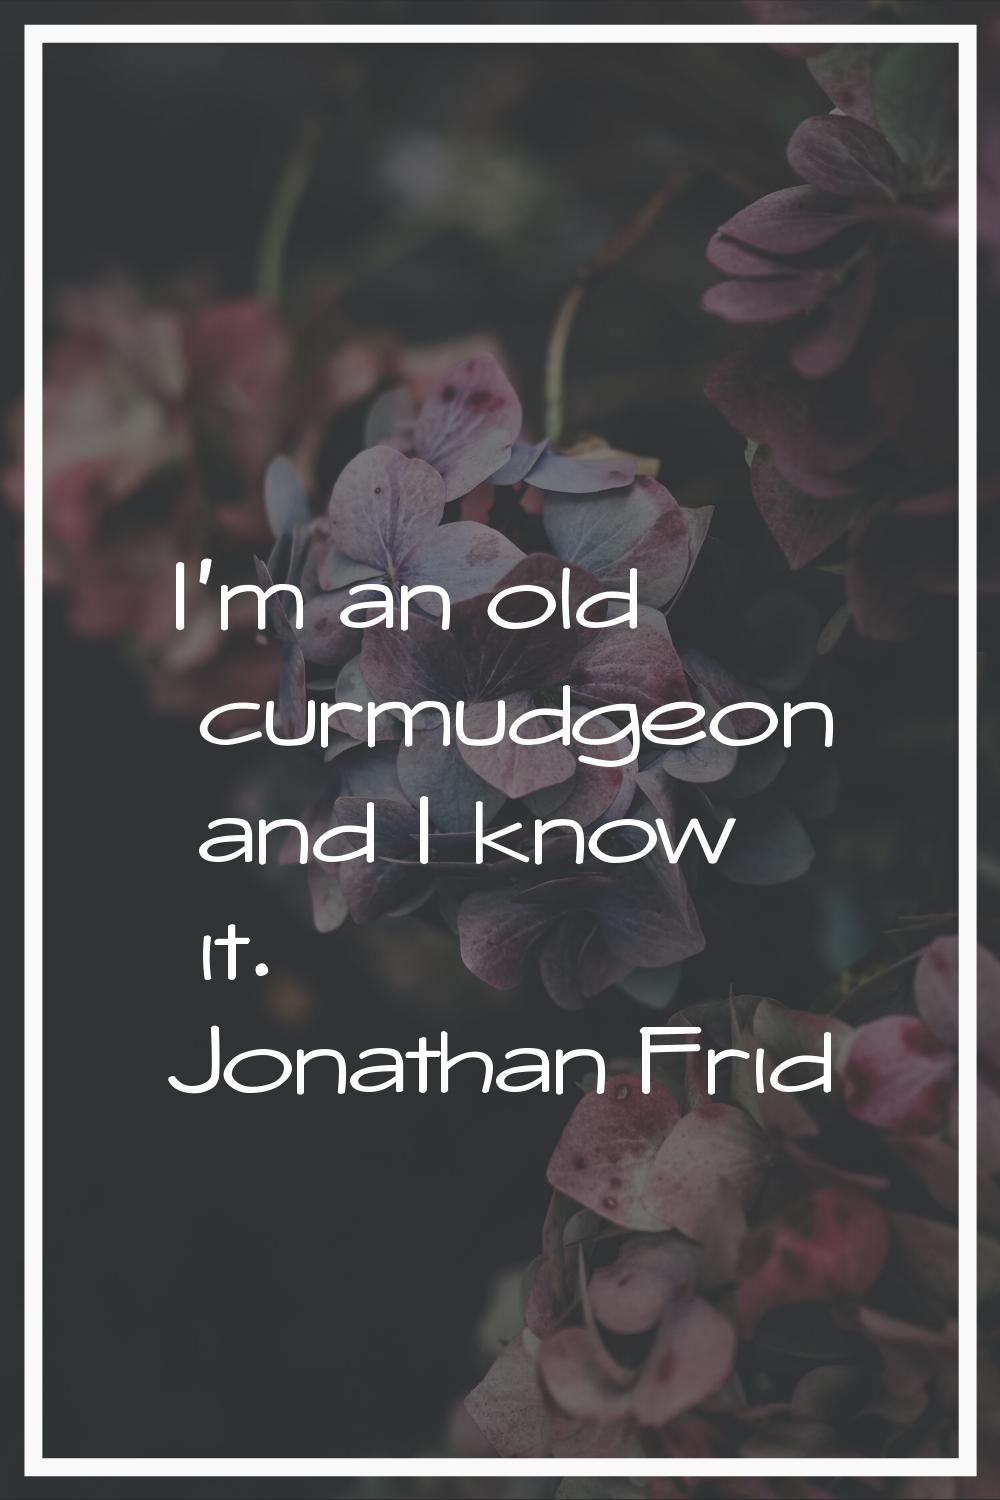 I'm an old curmudgeon and I know it.